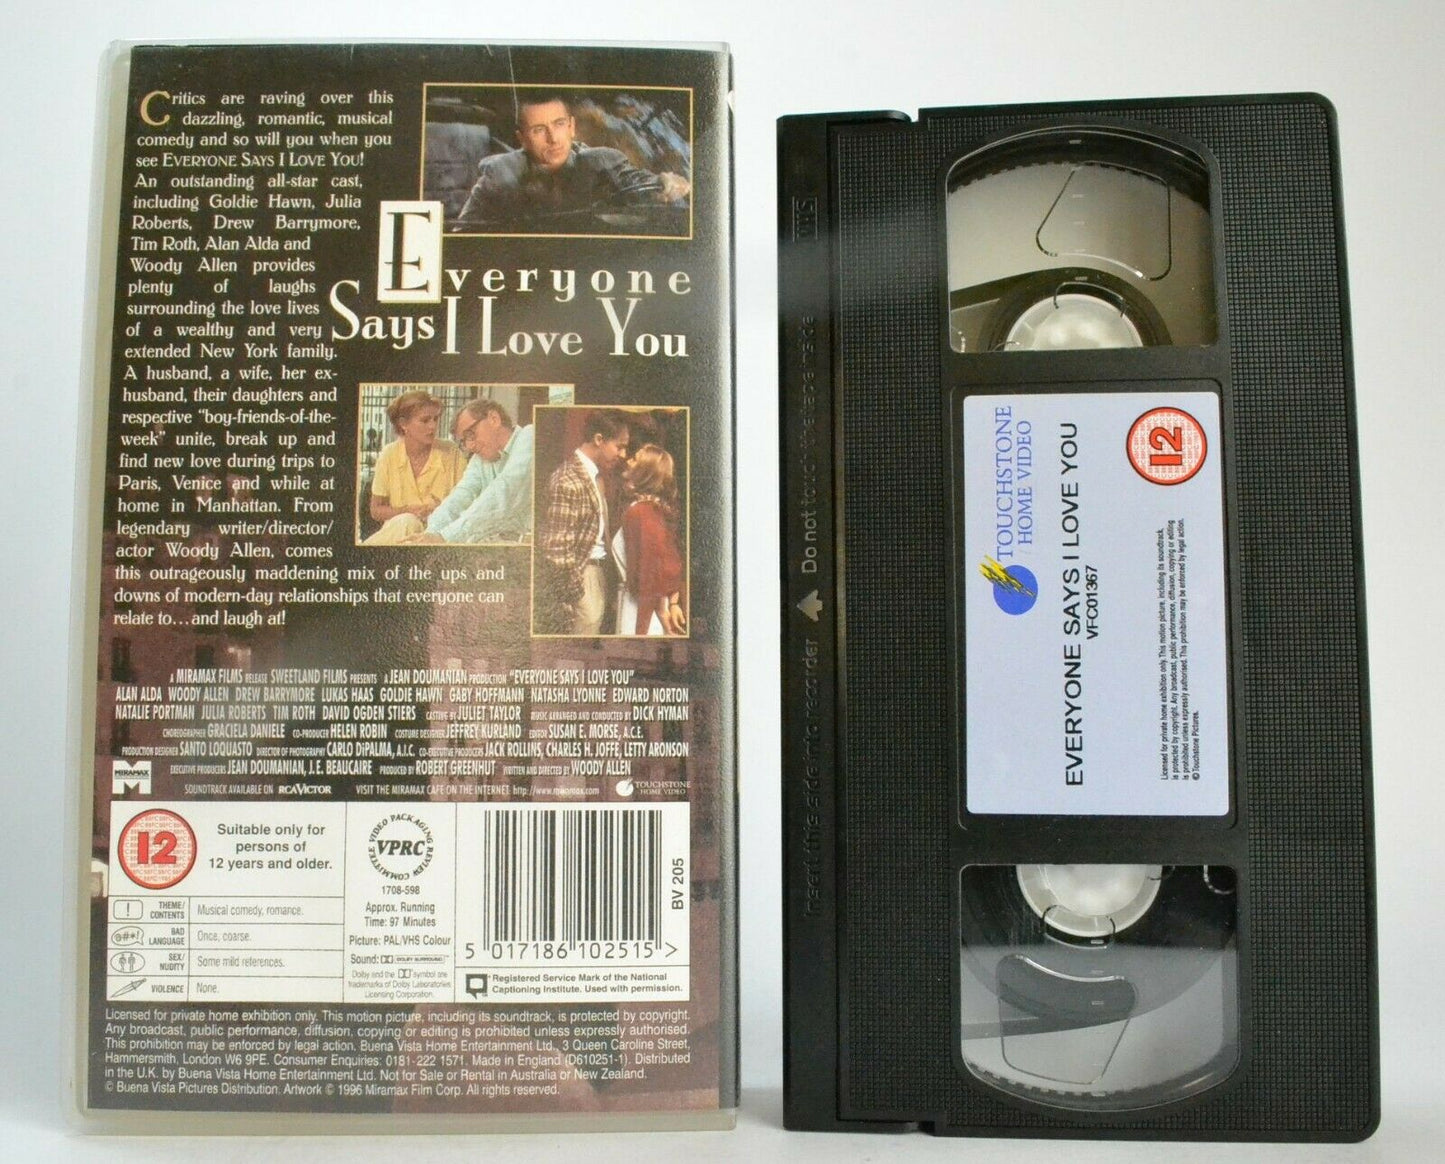 Everyone Says I Love You; [Woody Allen] Romantic Musical - Drew Barrymore - VHS-